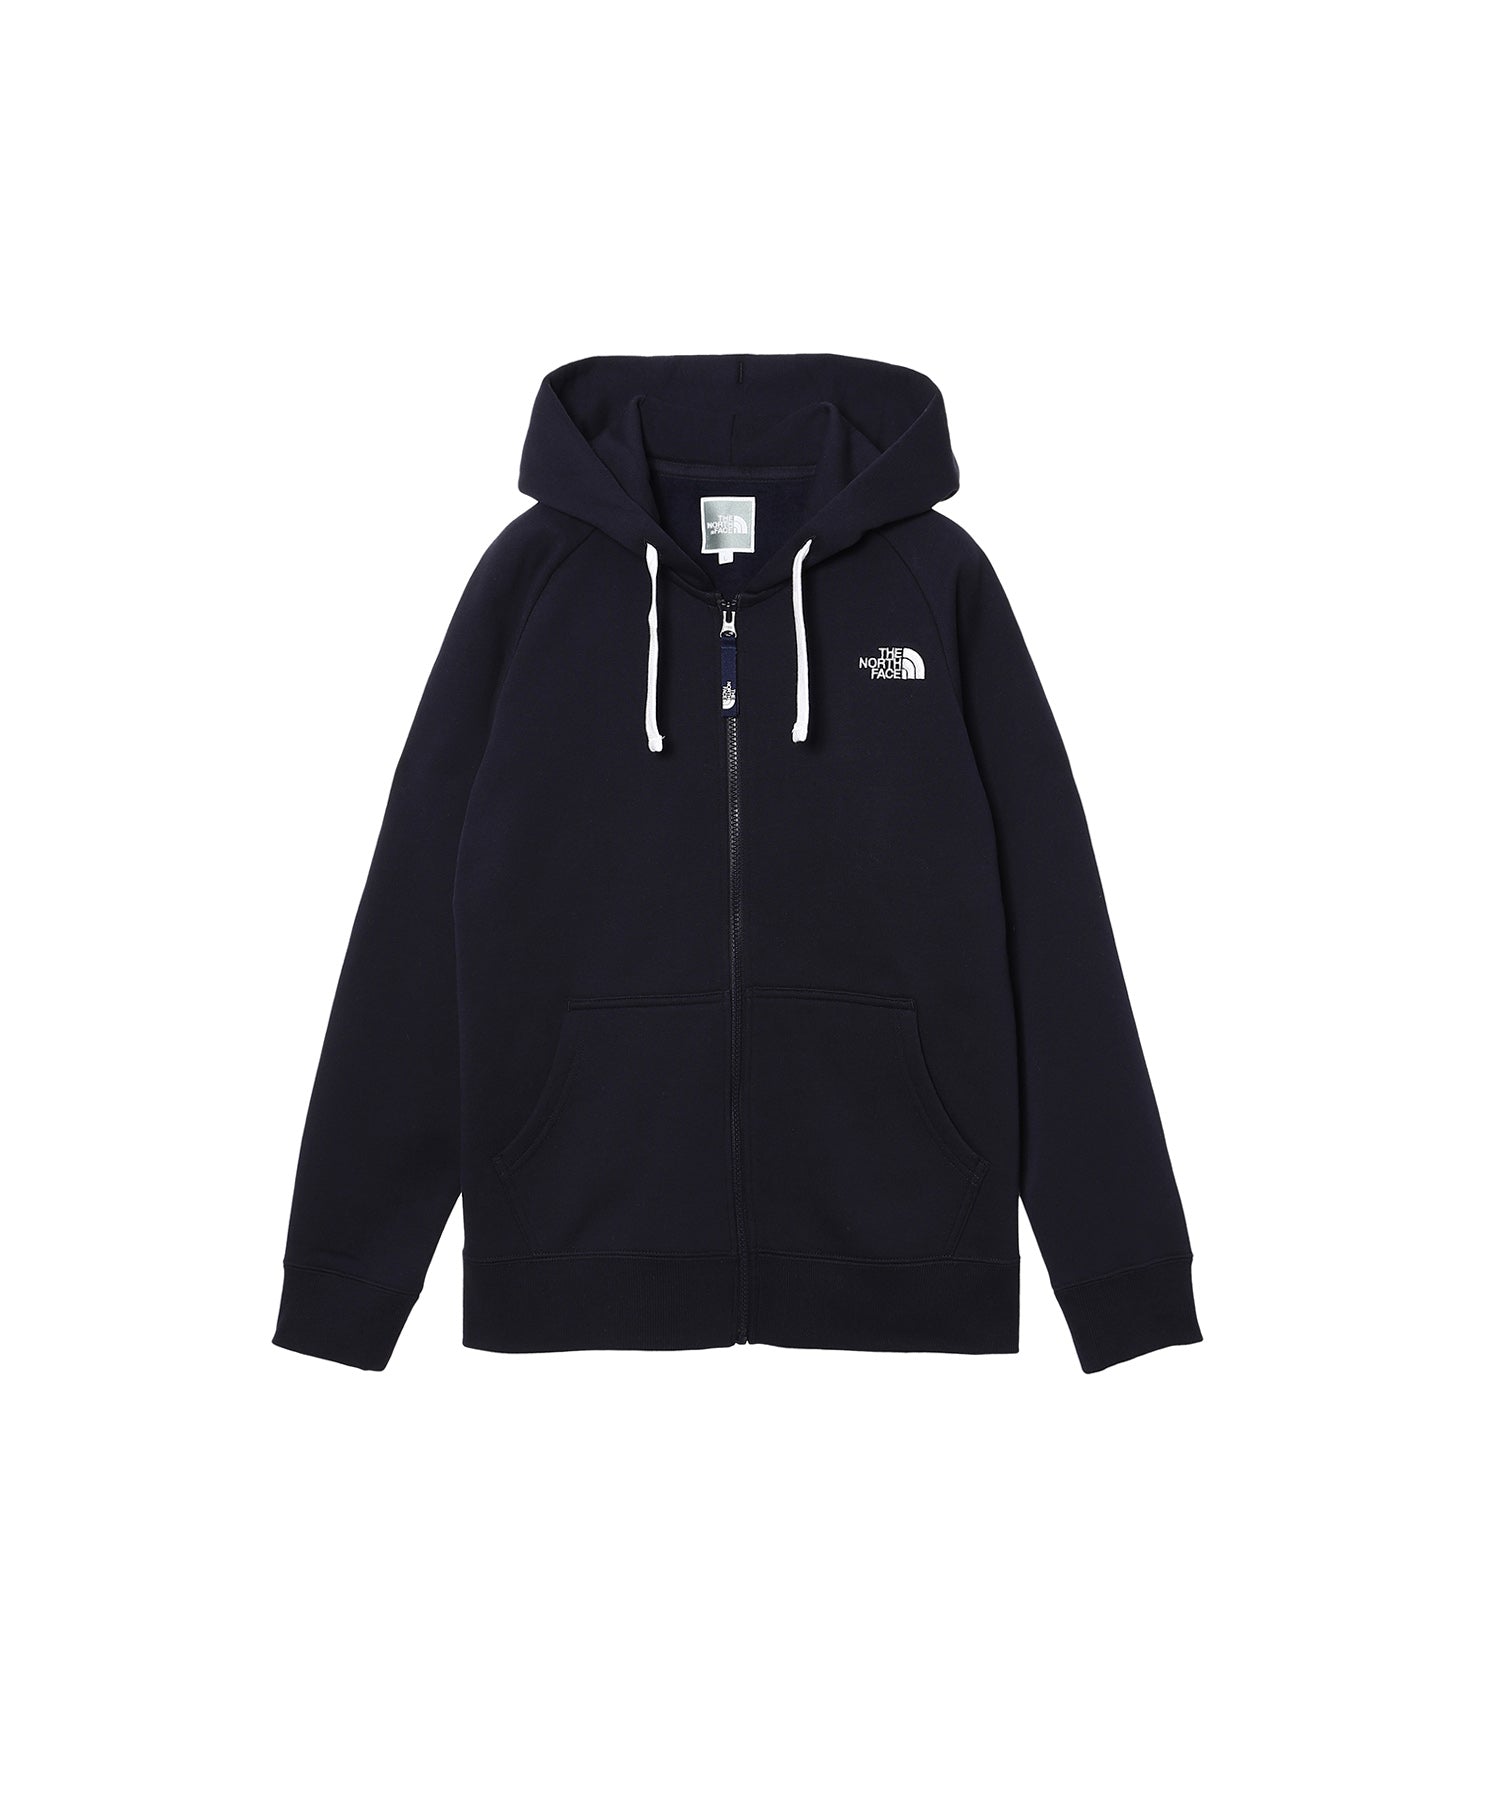 THE NORTH FACE full hooded